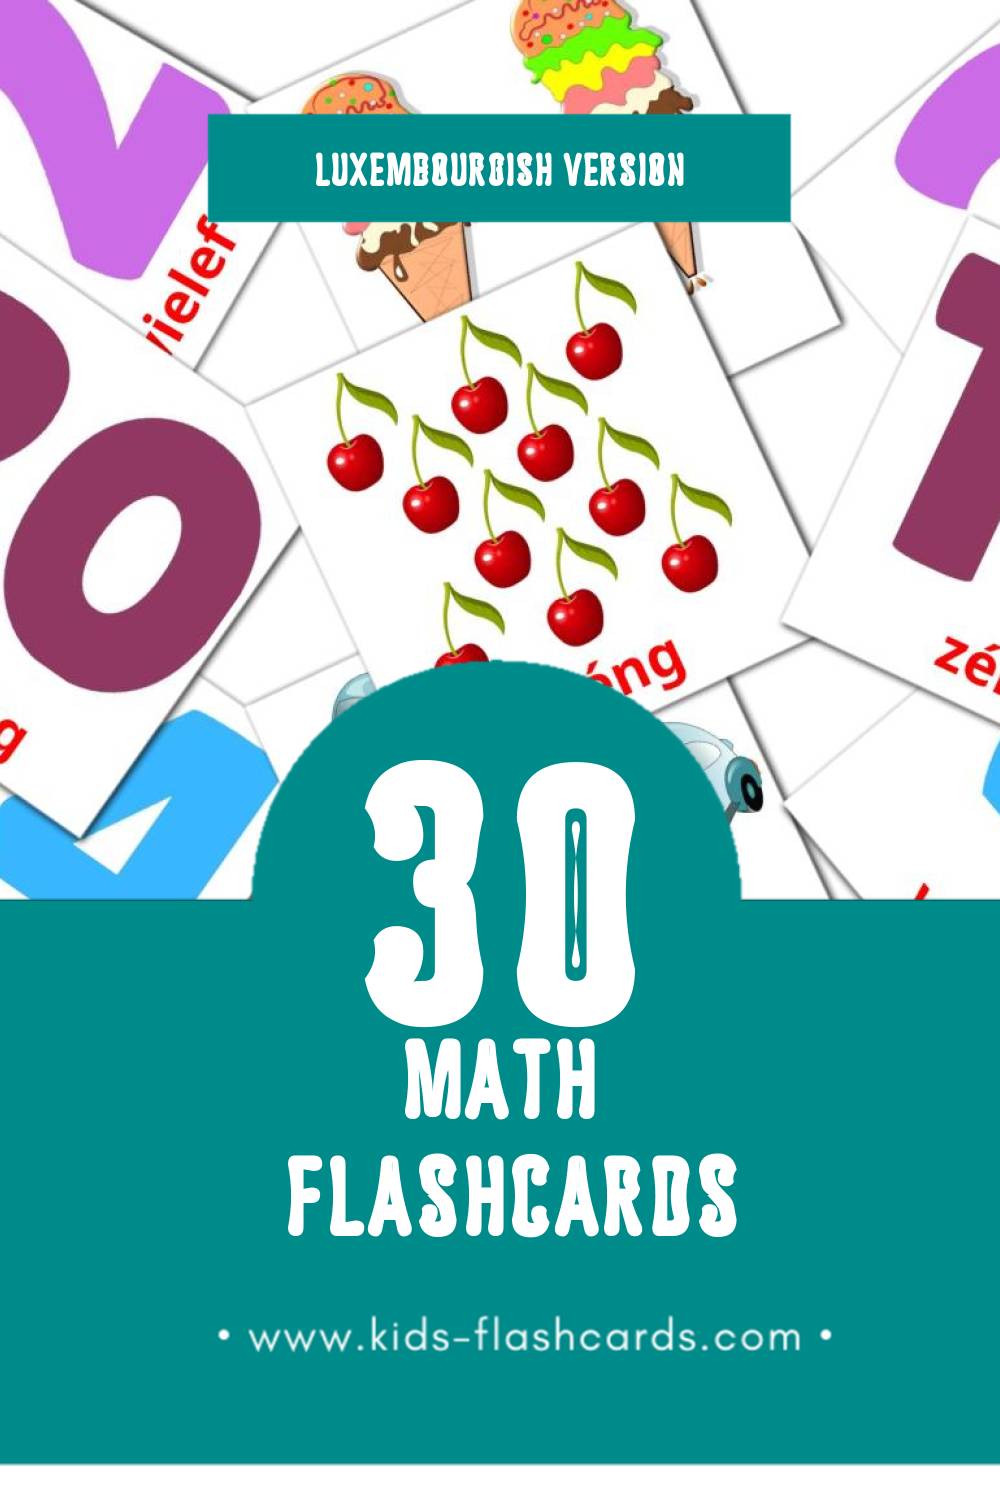 Visual Mathematik Flashcards for Toddlers (30 cards in Luxembourgish)